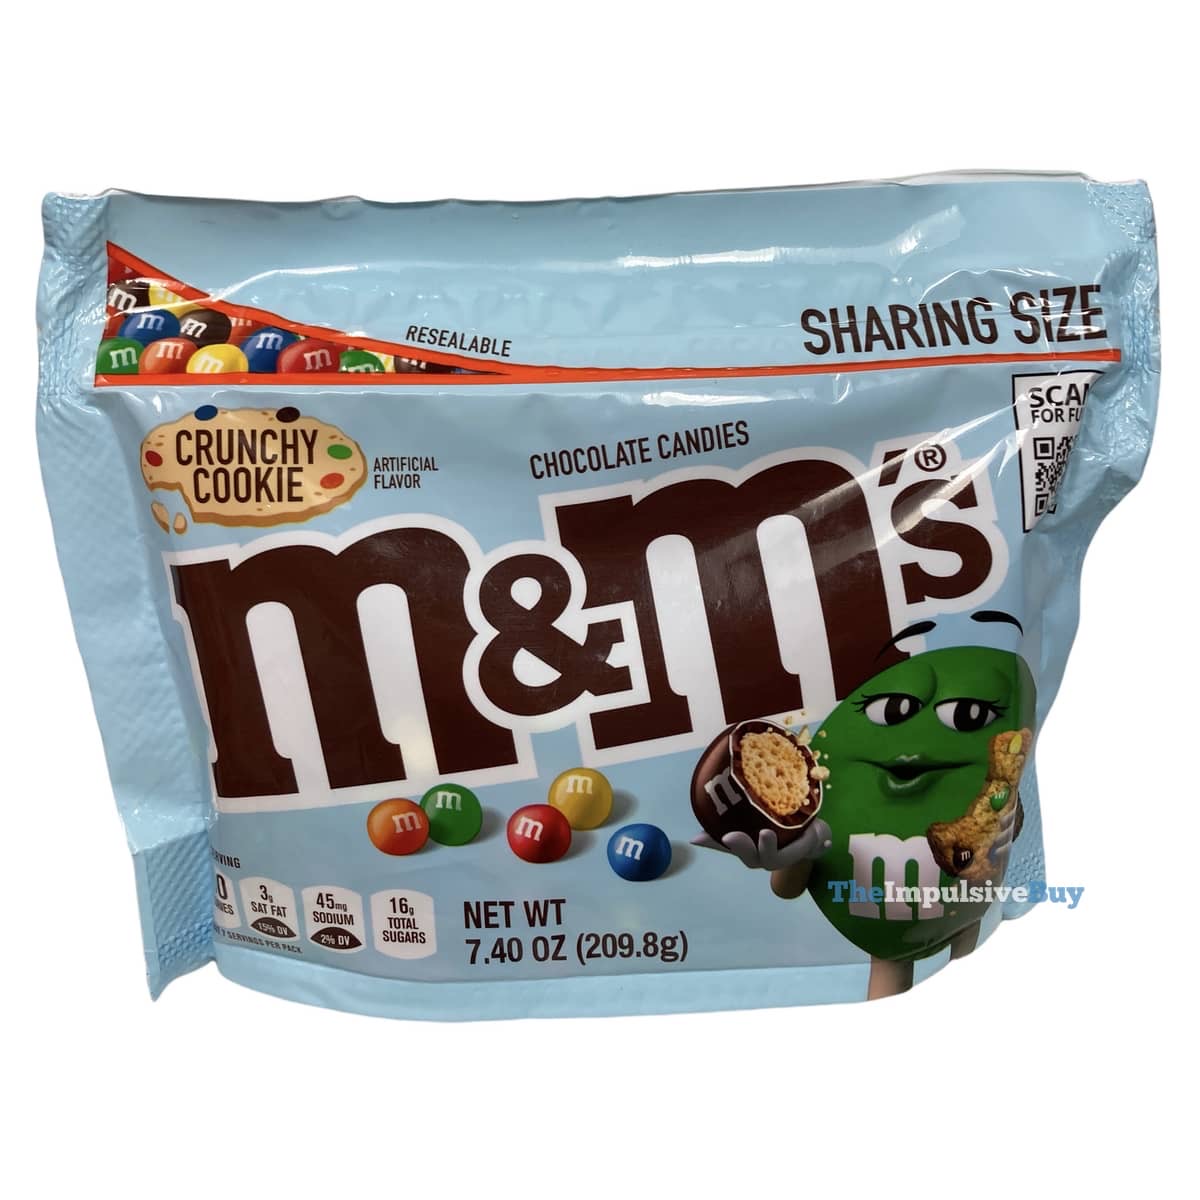 M&M'S, M&M'S CHOCOLATE CANDY COMMERCIAL, CRUNCHY COOKIES M&M'S